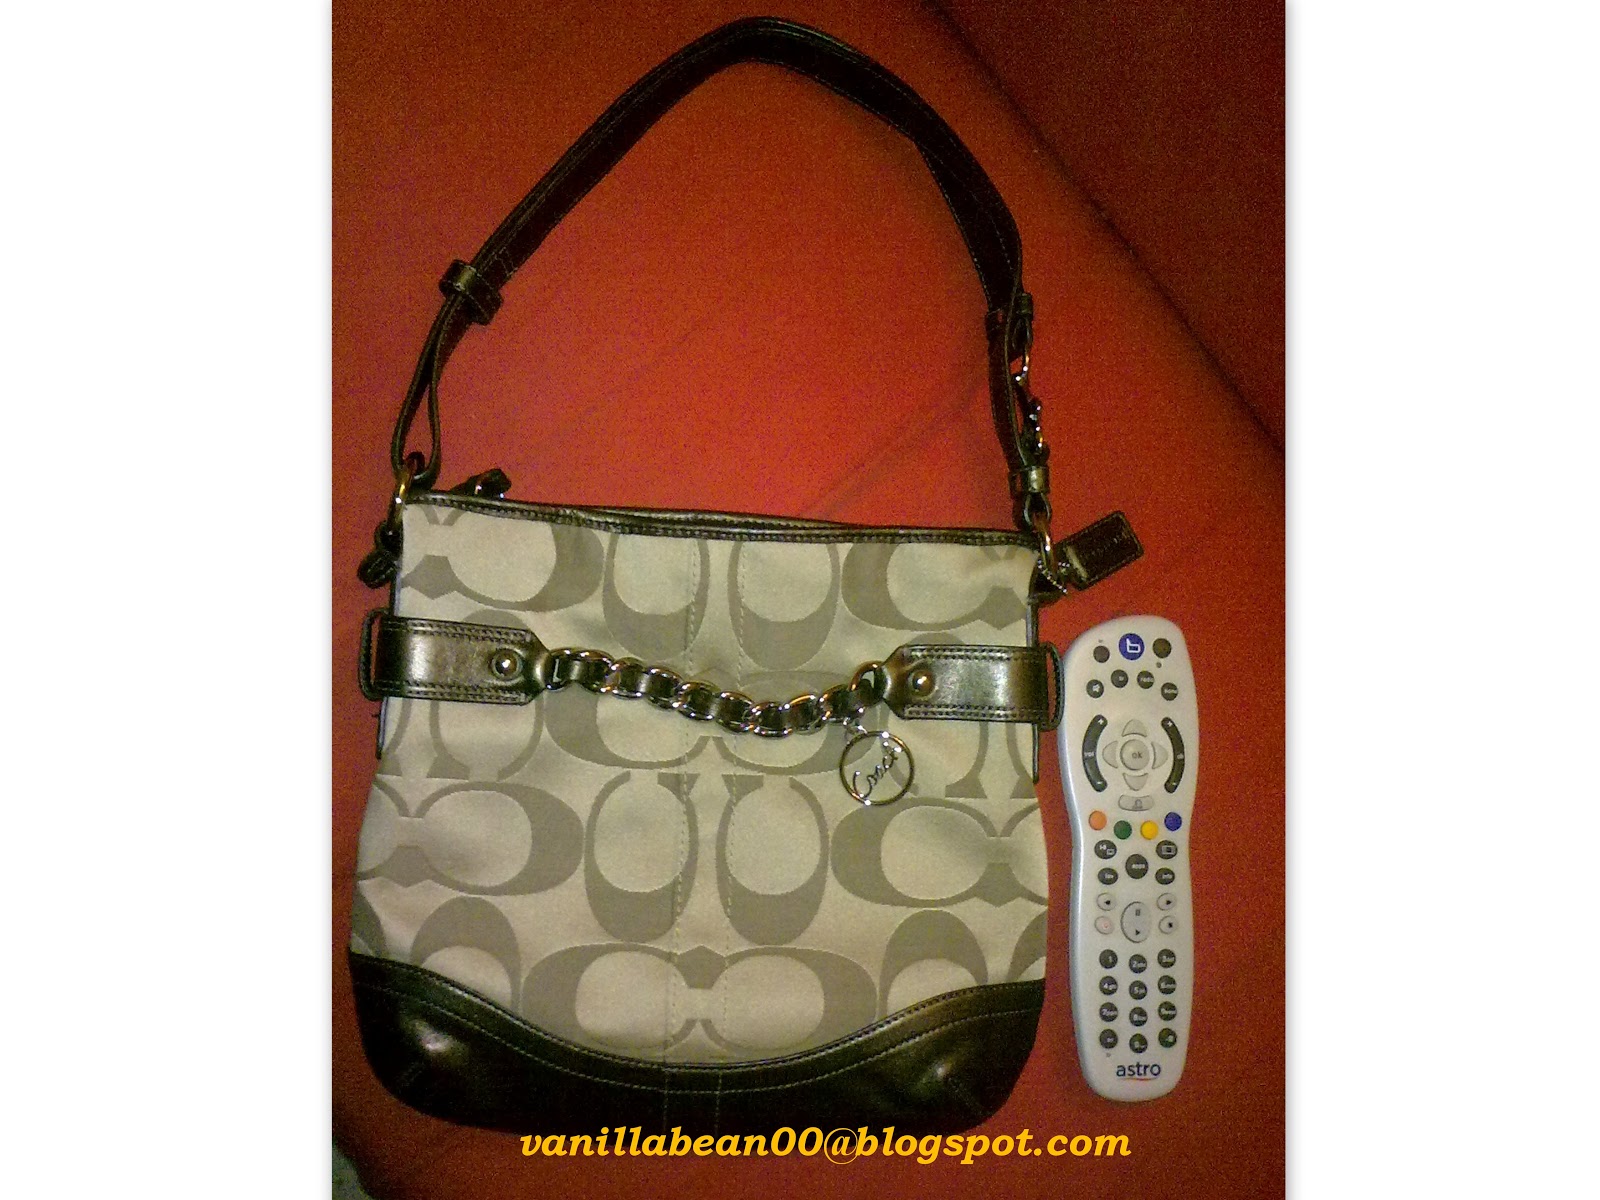 ... BEAN: Used Authentic Coach Handbag For Sale with affordable price